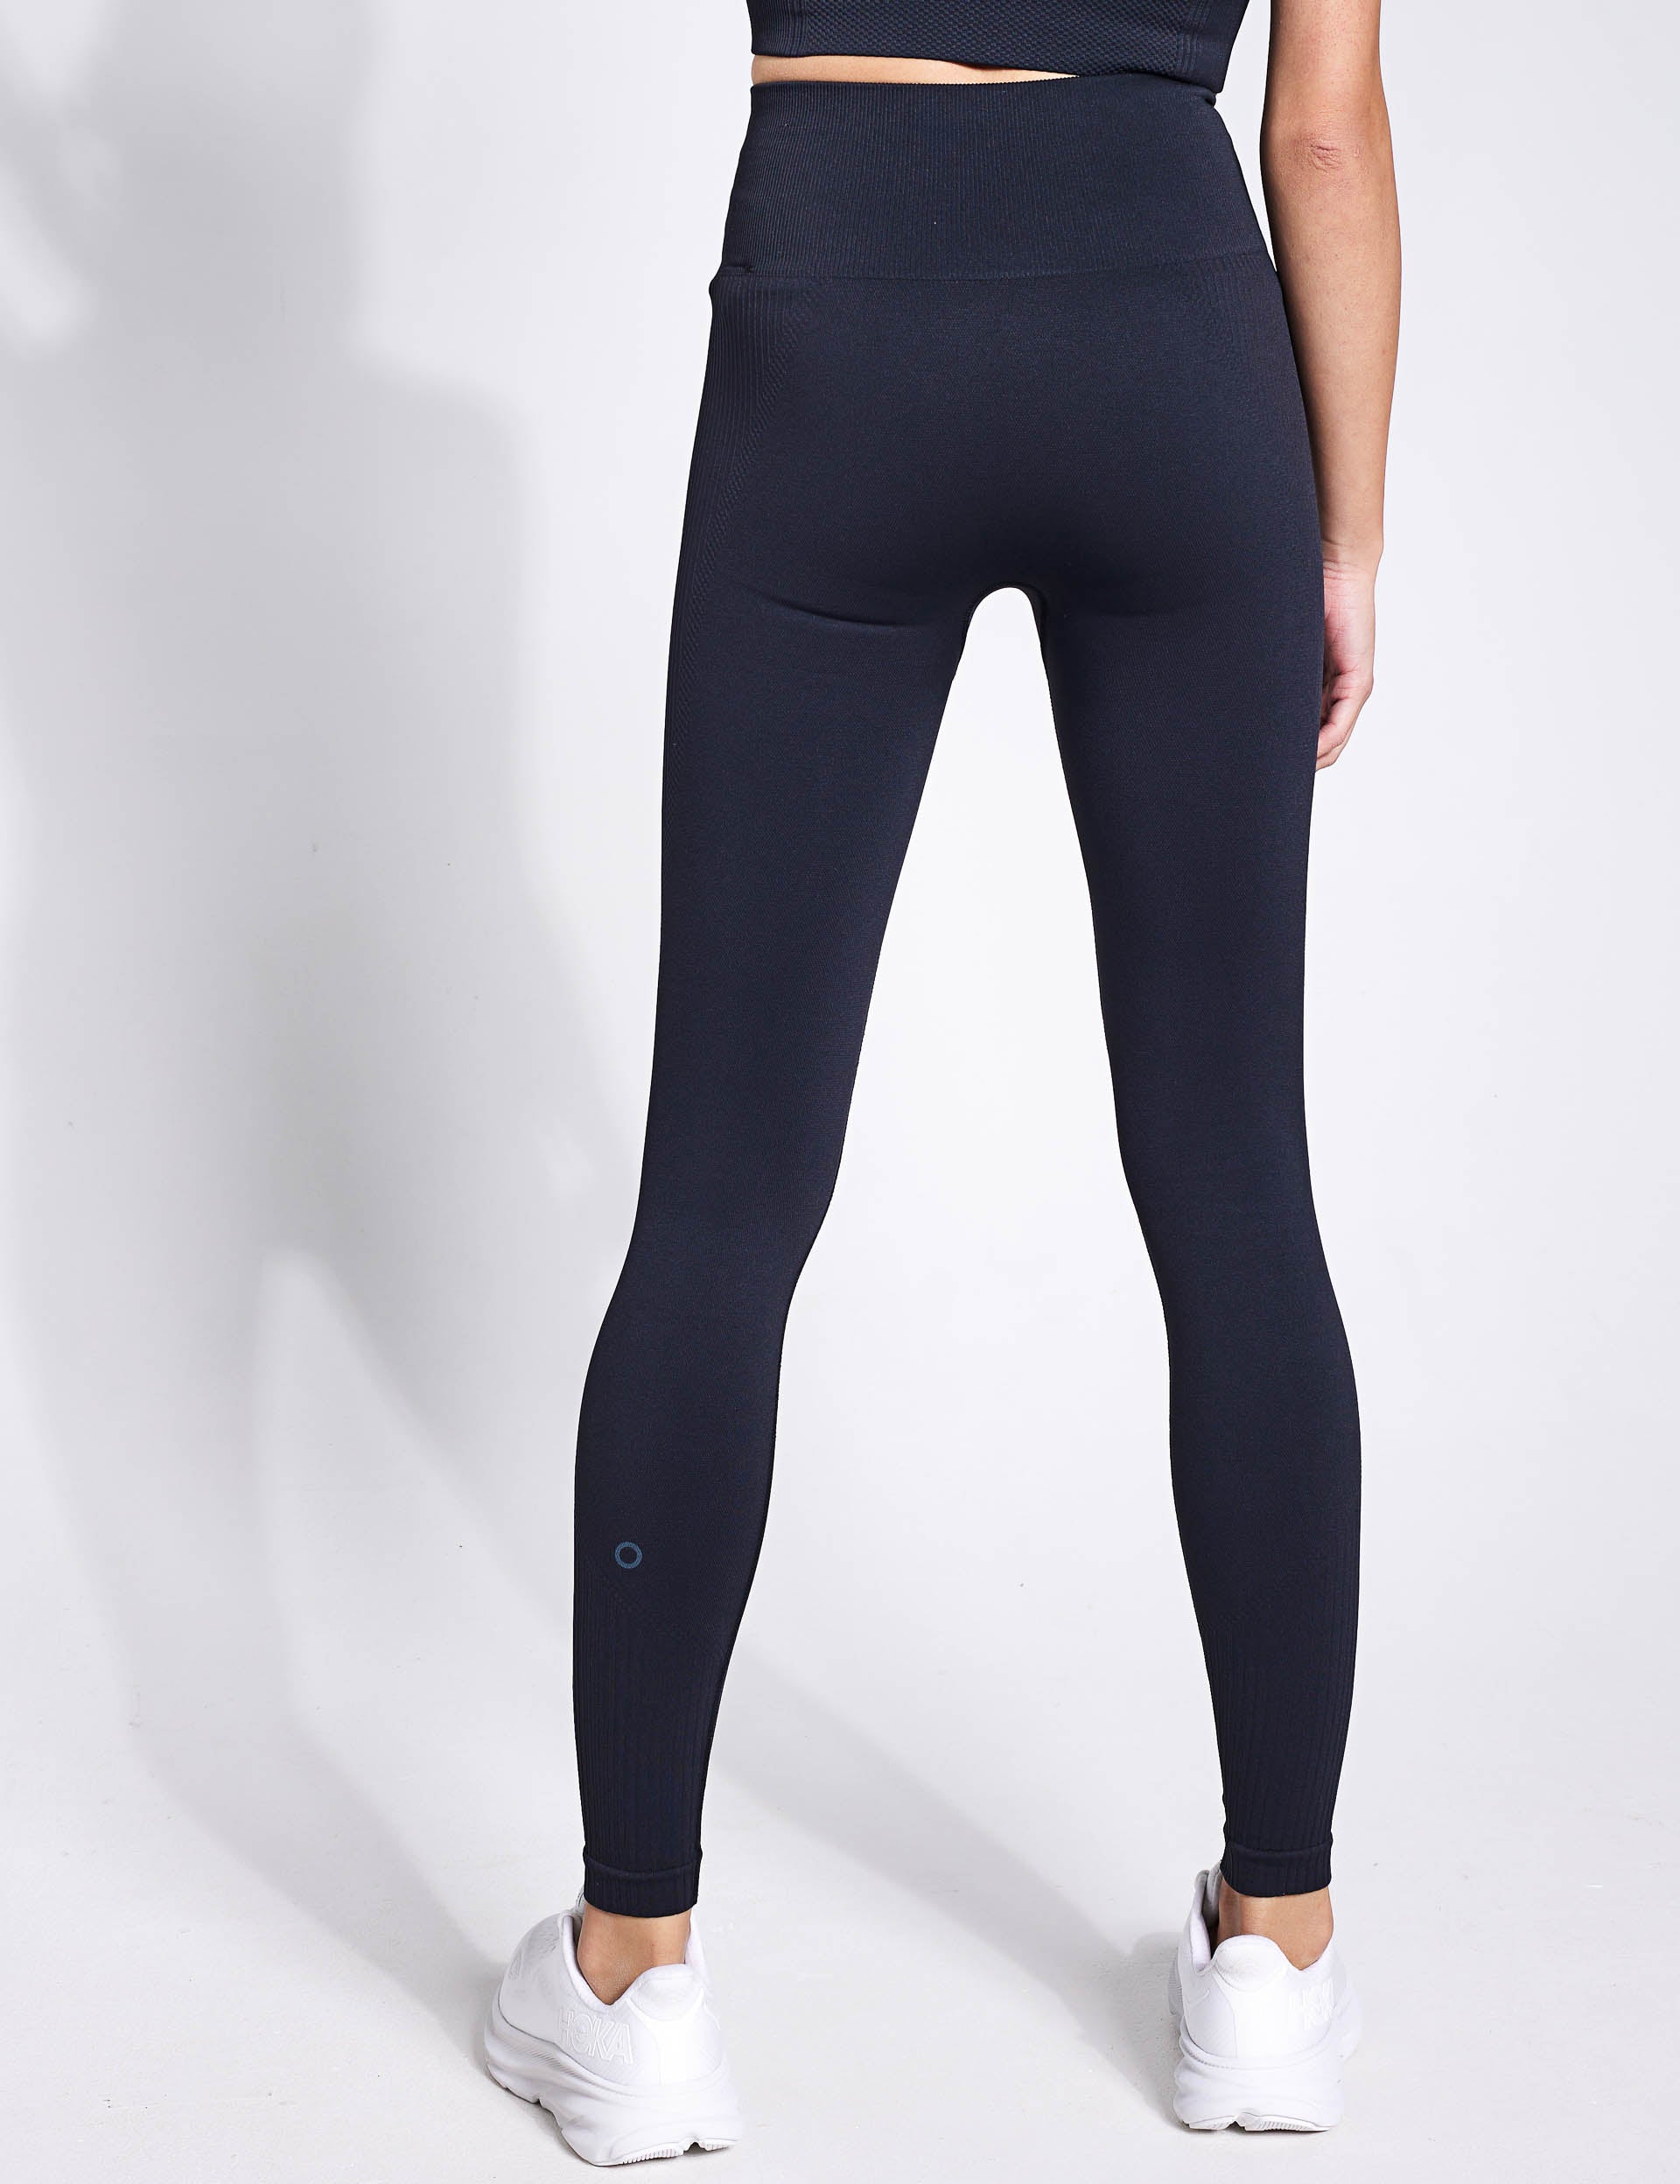 Goodmove Go Seamless Legging - Carbonimages2- The Sports Edit